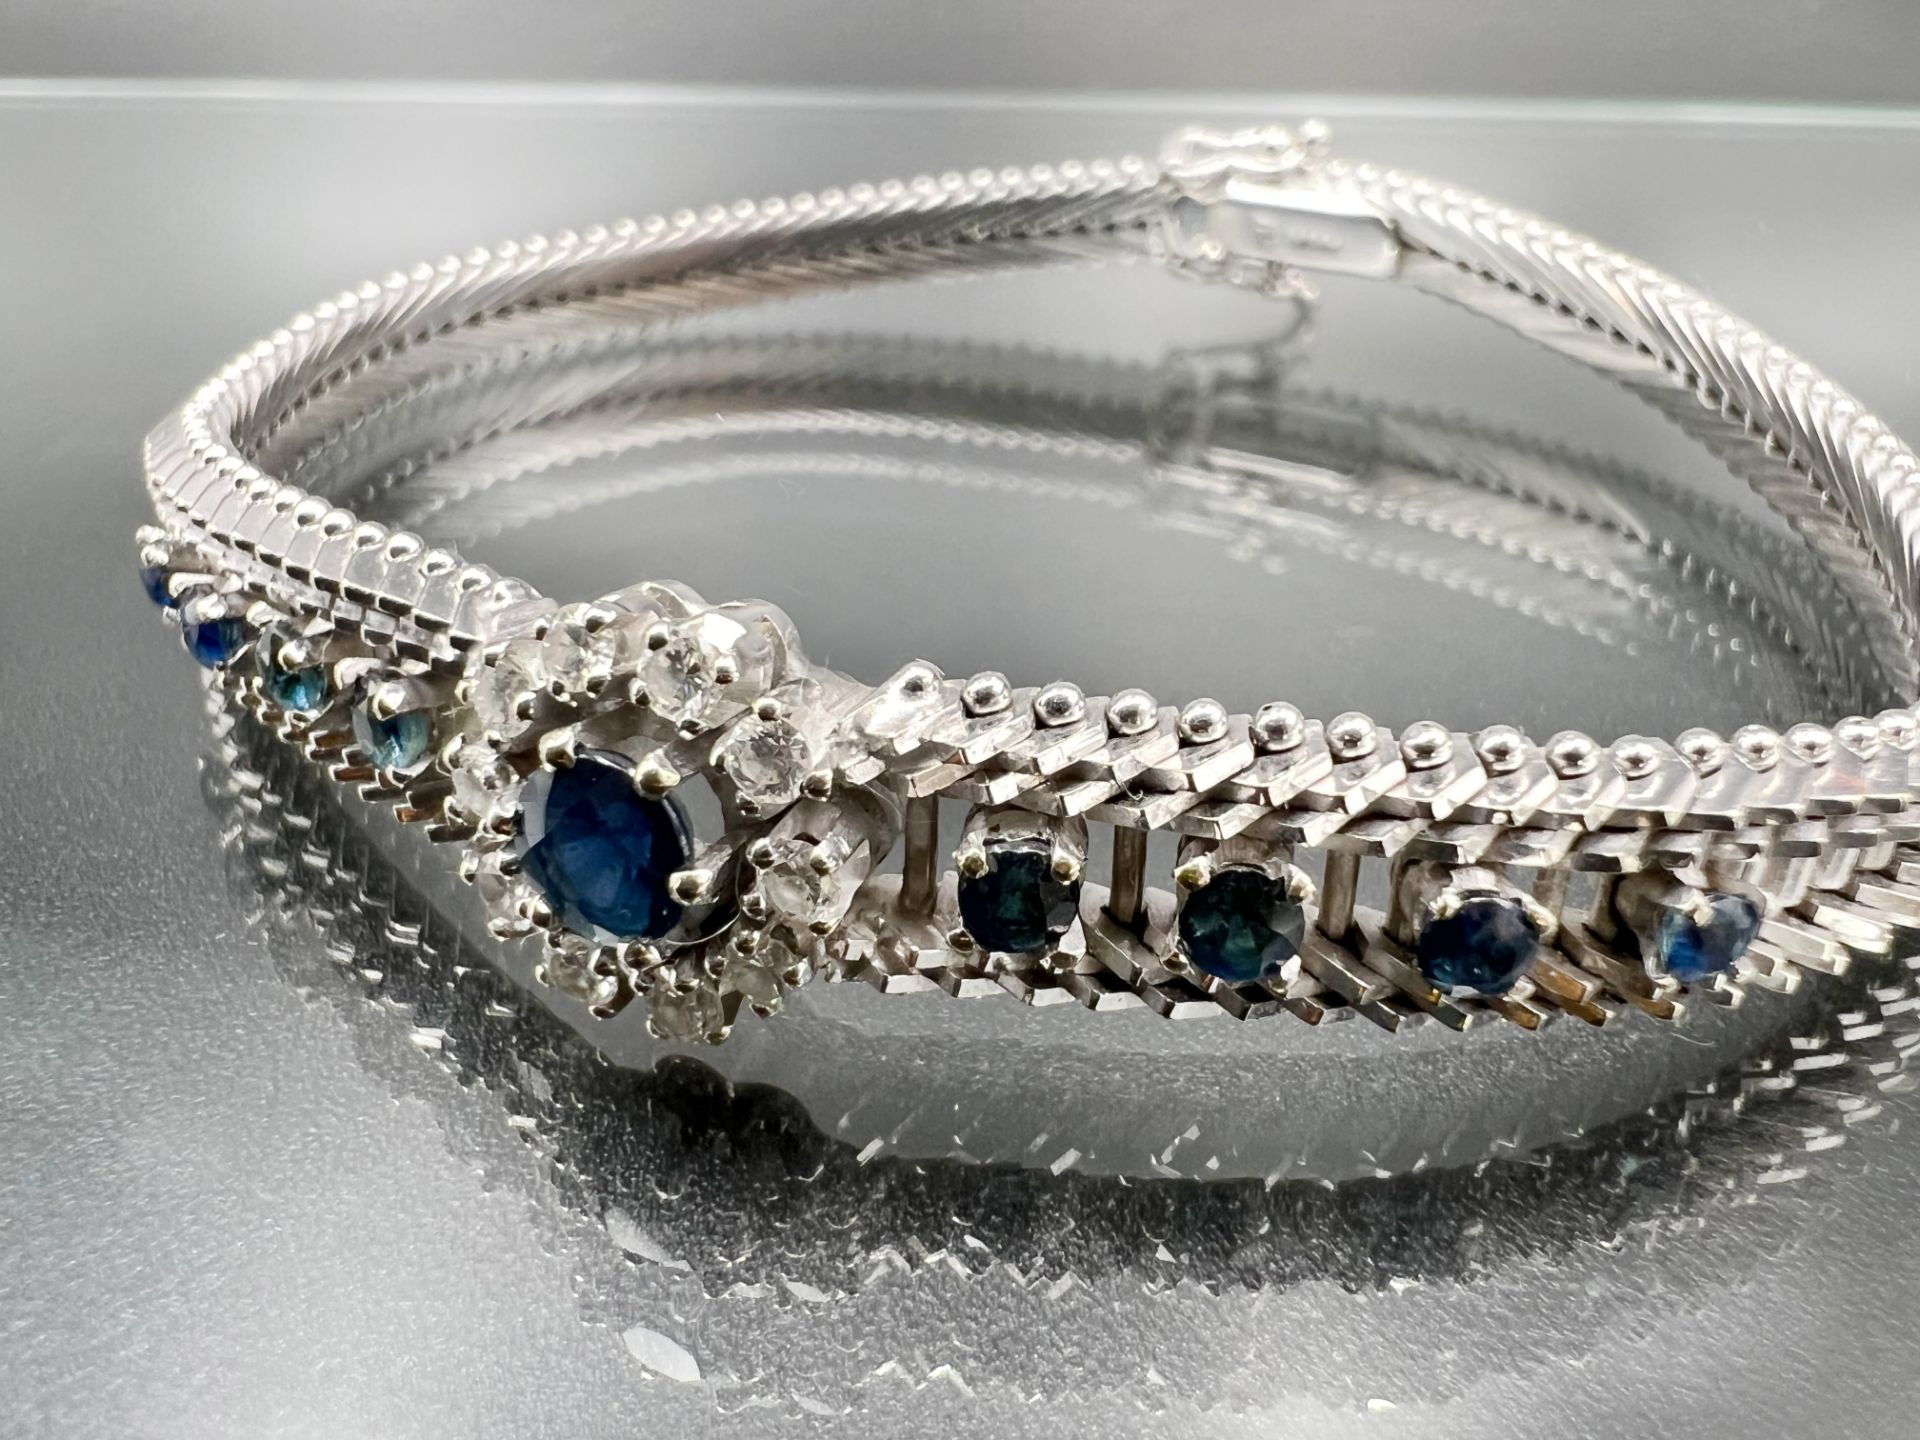 Bracelet 585 white gold with diamonds and sapphires. - Image 3 of 6